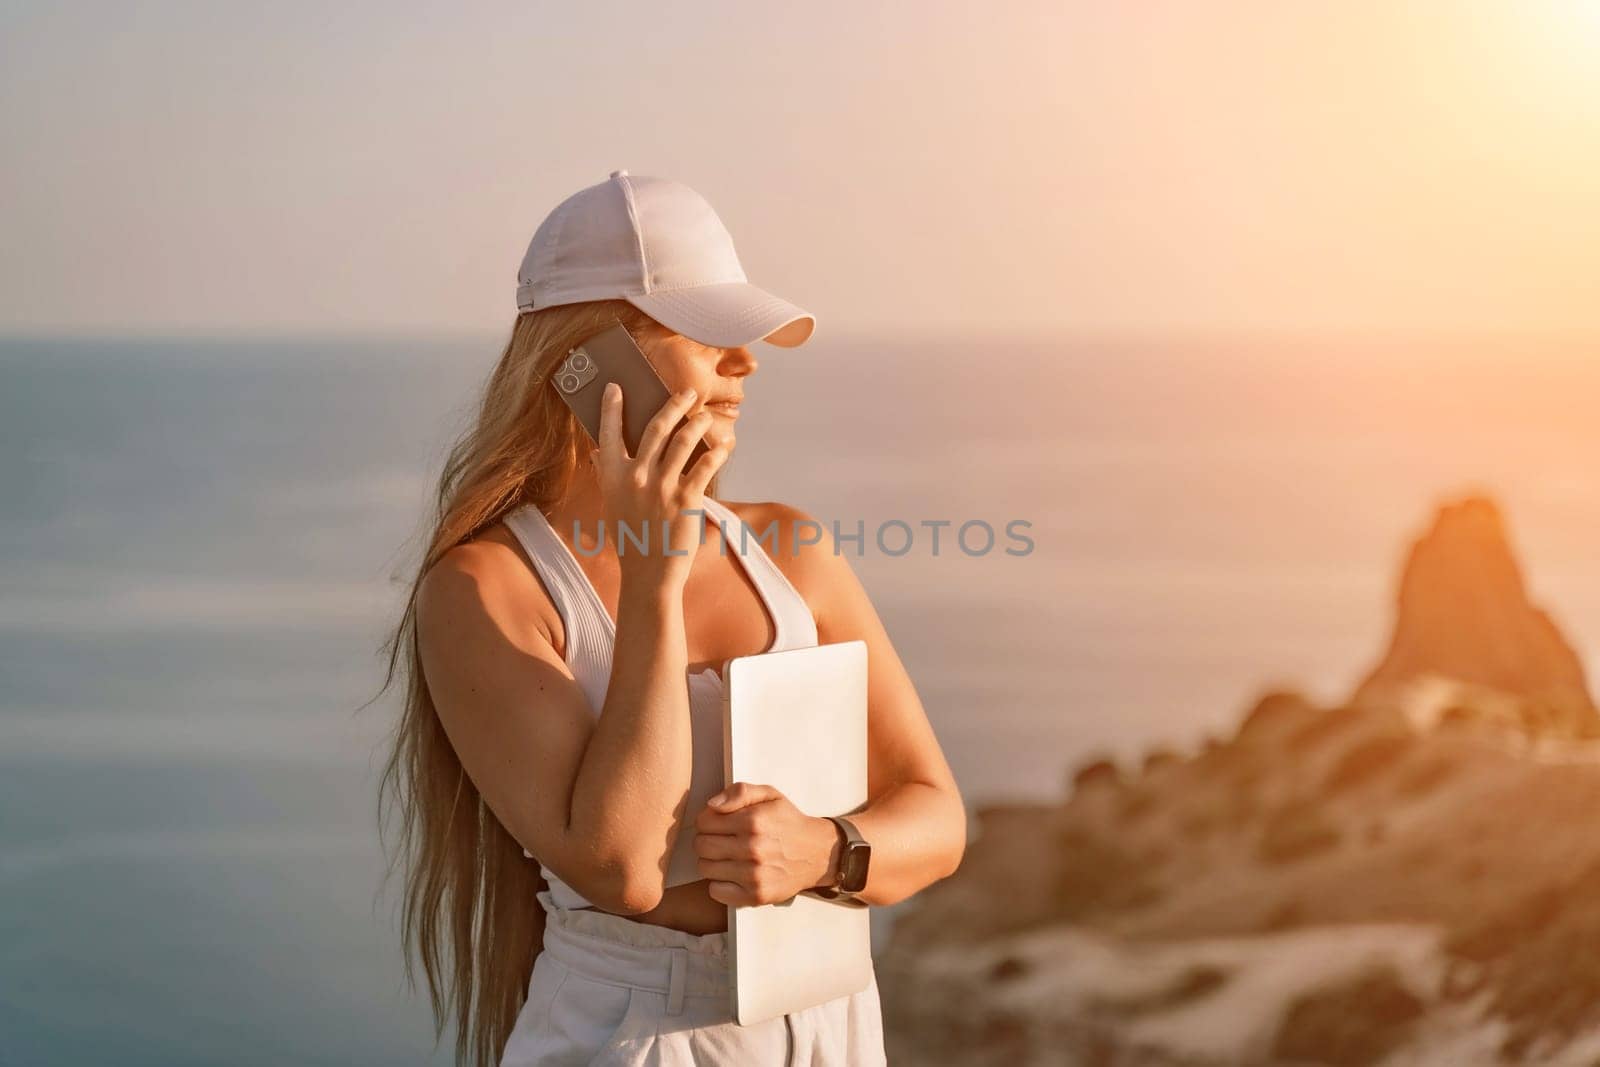 A happy woman in white shorts and T-shirt enjoys the picturesque sea view while holding a laptop and talking on the phone